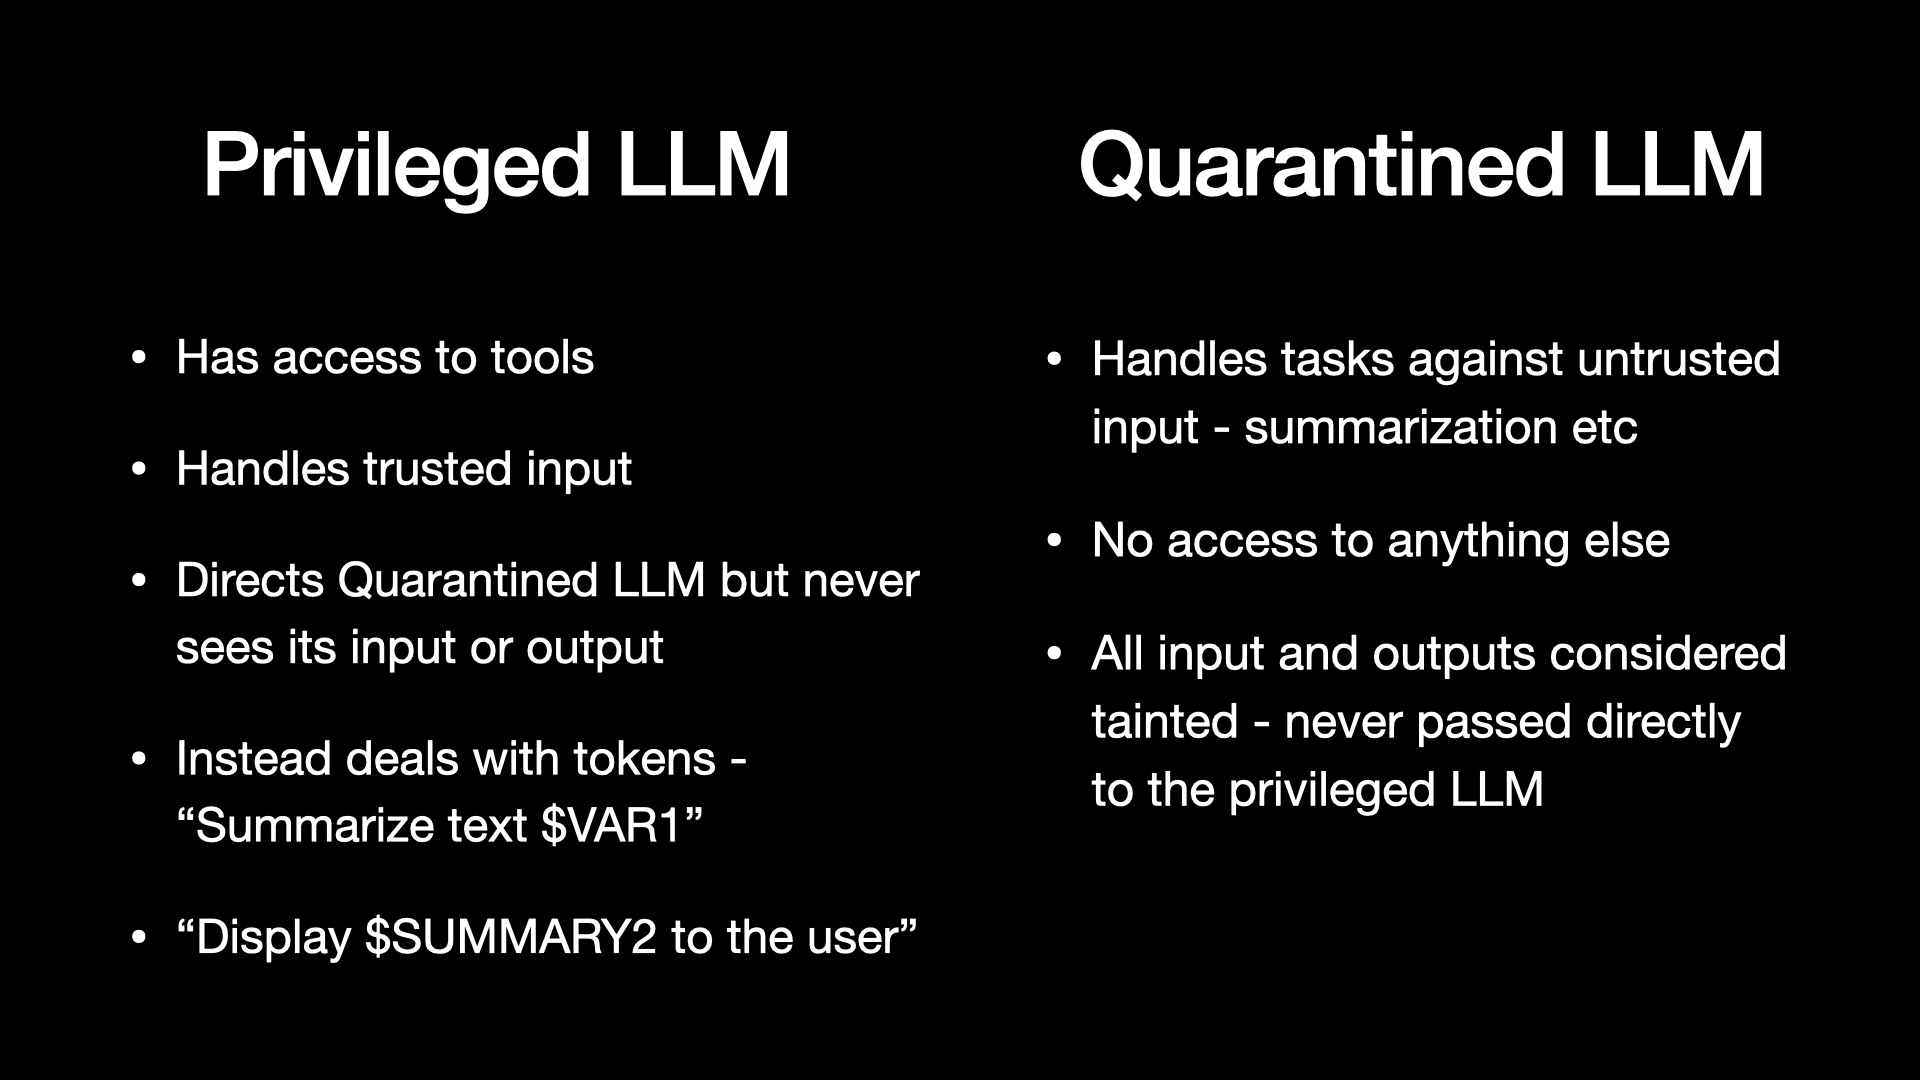 Privileged LLM: Has access to tools. Handles trusted input. Directs Quarantined LLM but never sees its input or output. Instead deals with tokens - “Summarize text $VAR1”. “Display $SUMMARY2 to the user” Quarantined LLM: Handles tasks against untrusted input - summarization etc. No access to anything else. All input and outputs considered tainted - never passed directly to the privileged LLM